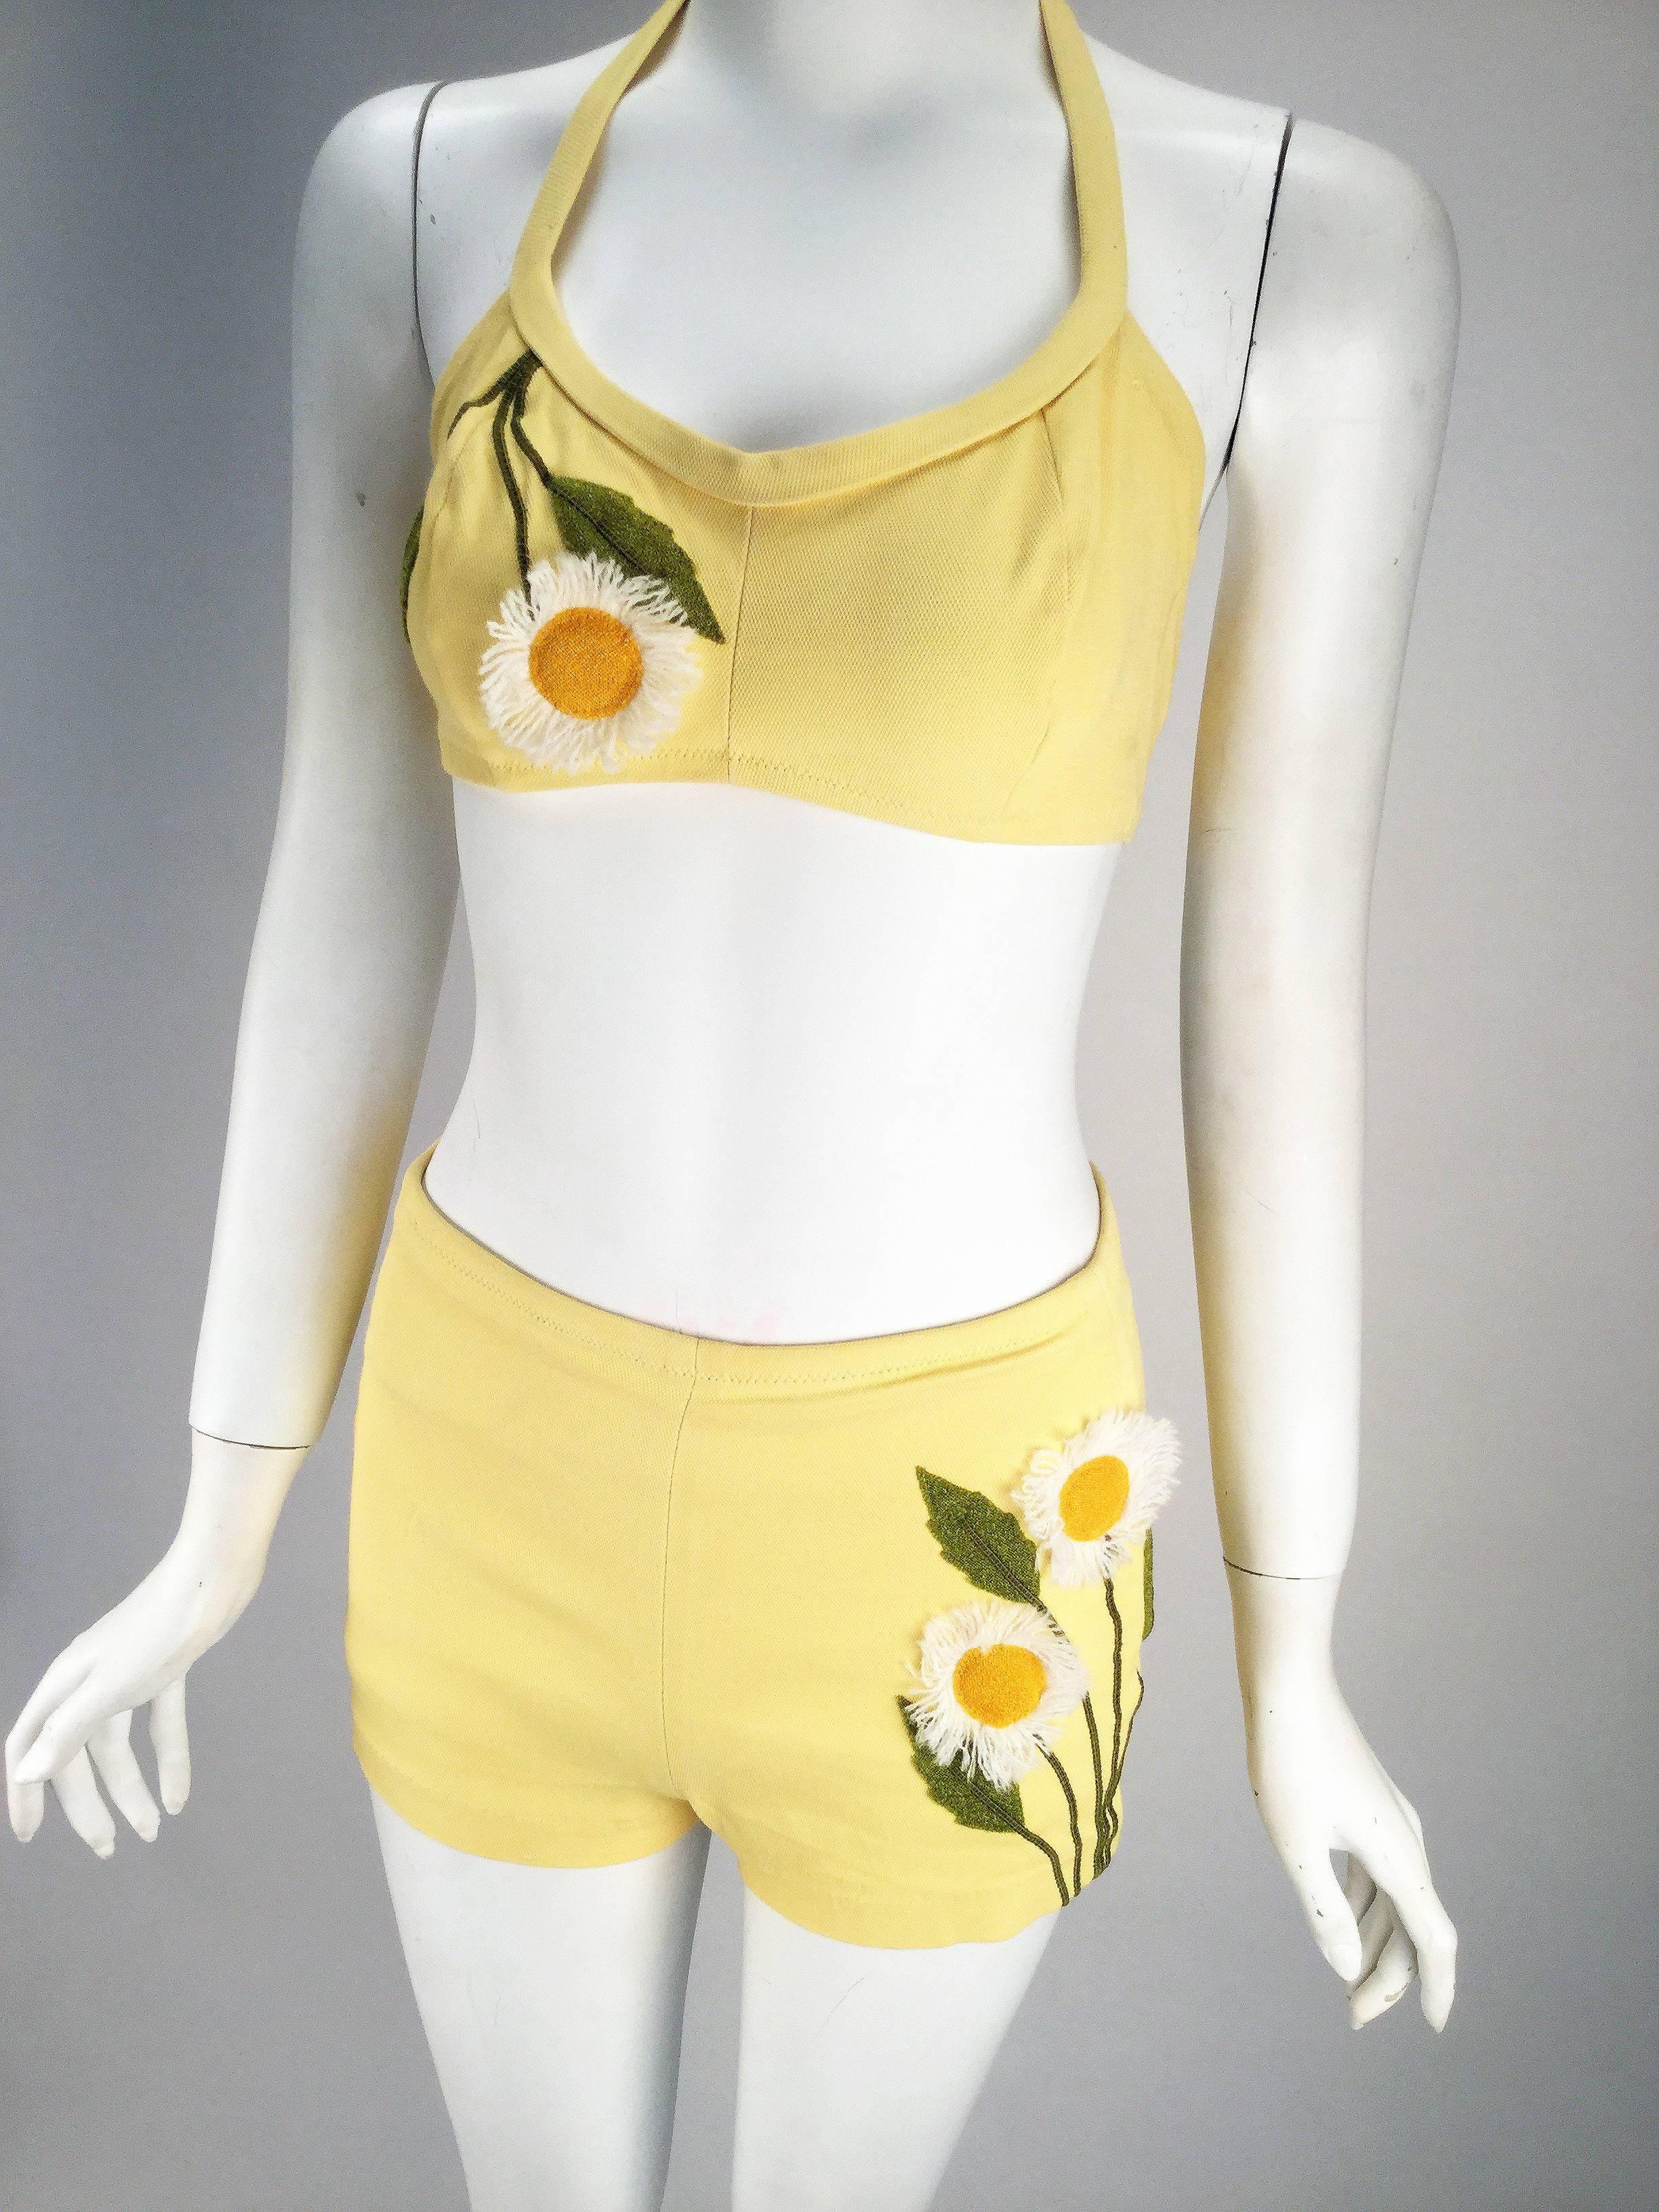 pale yellow bathing suit